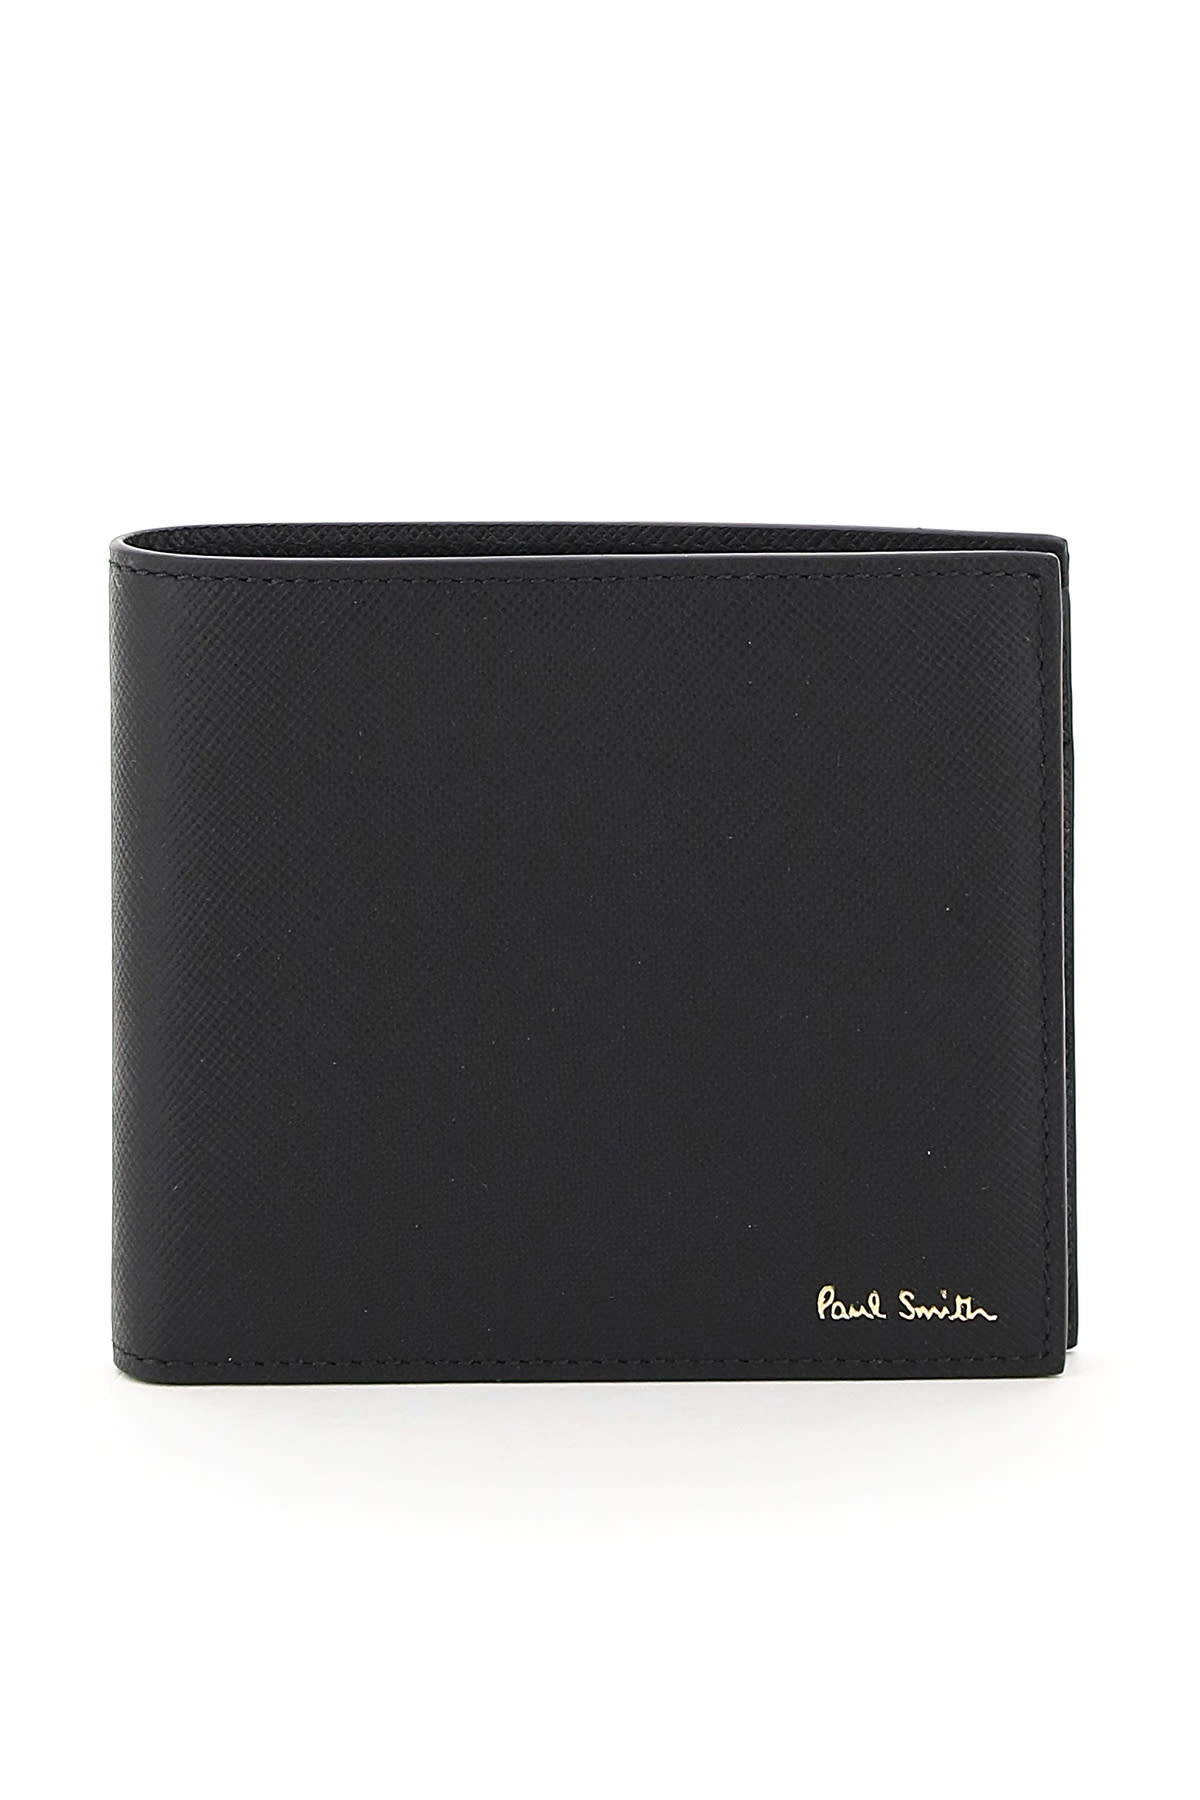 Paul Smith Bifold Wallet Mini With Print